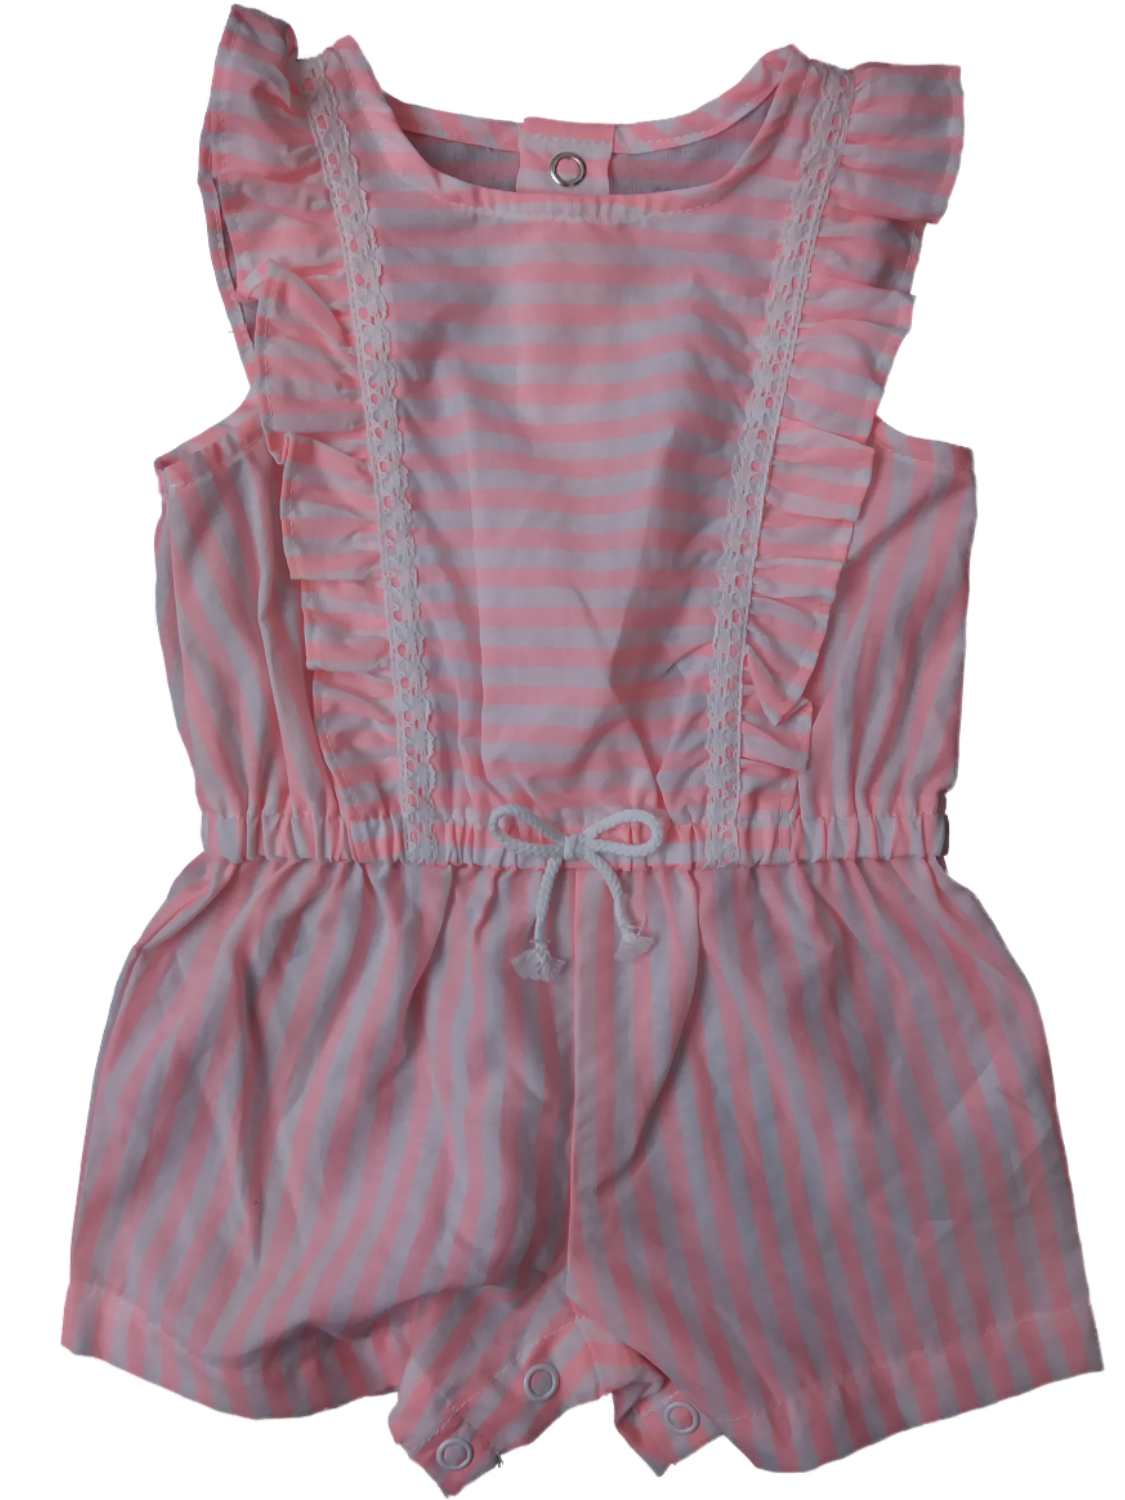 Carter's Carters White & Neon Pink Striped Infant Single Romper Outfit Baby Bodysuit 3m